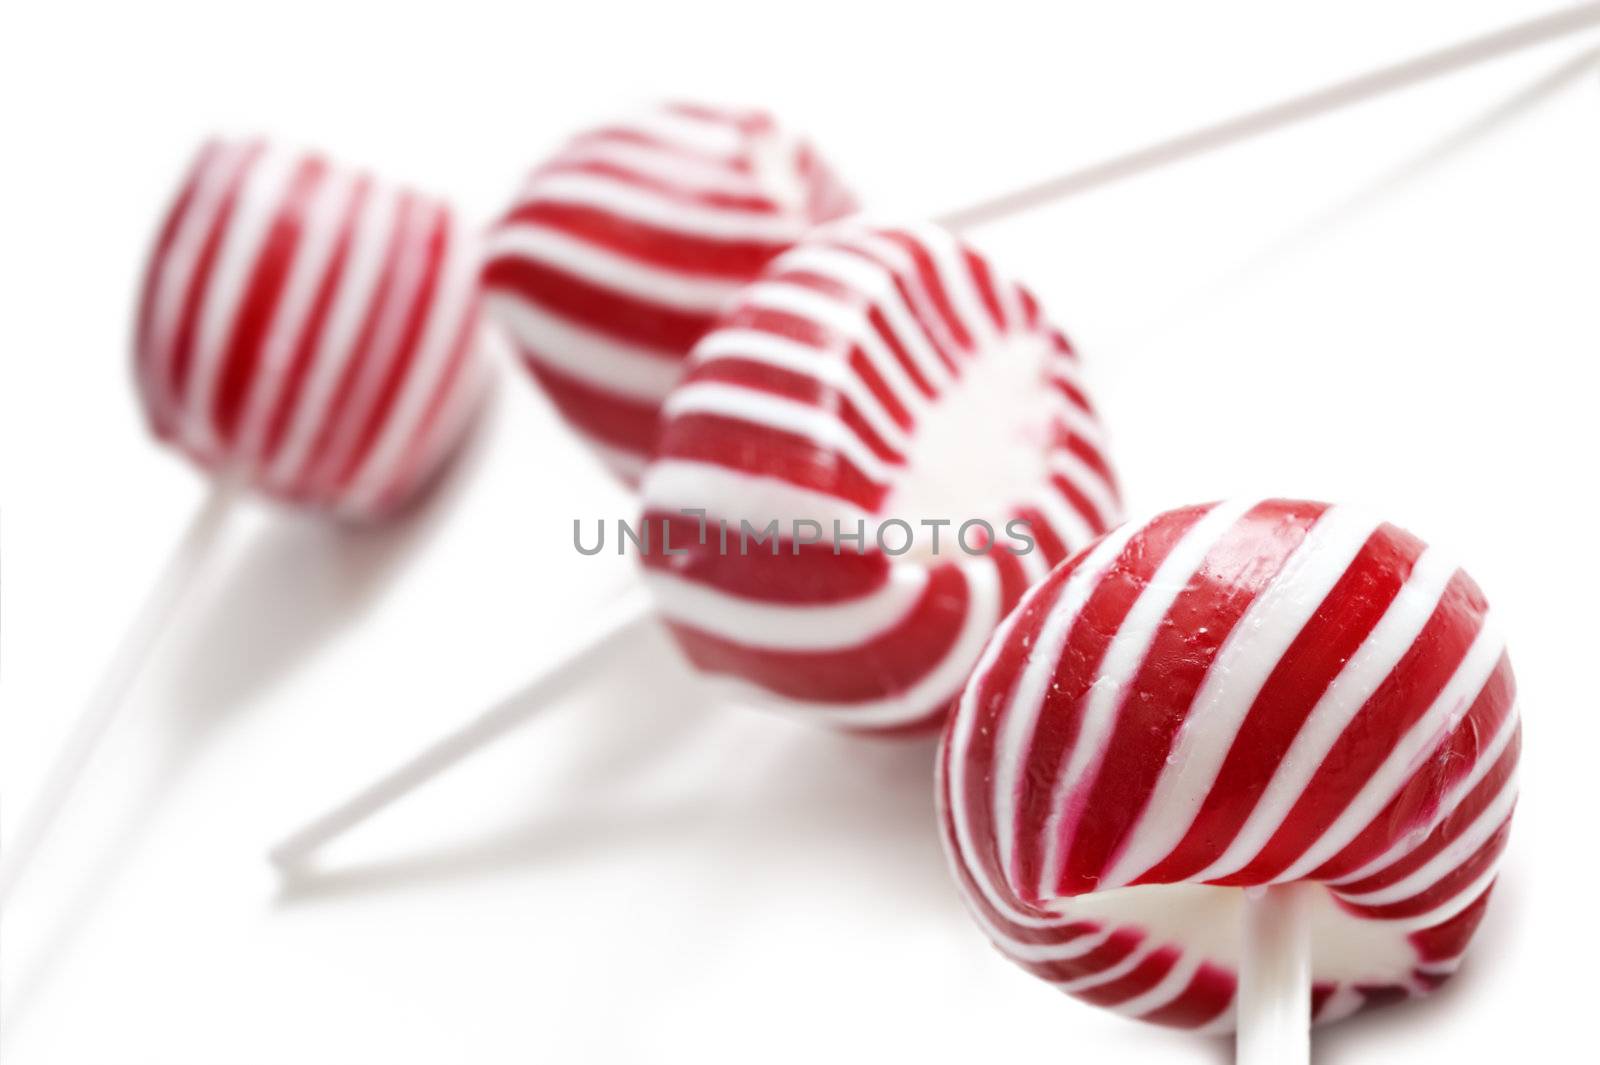 Colorful red lollipops on white background by tish1